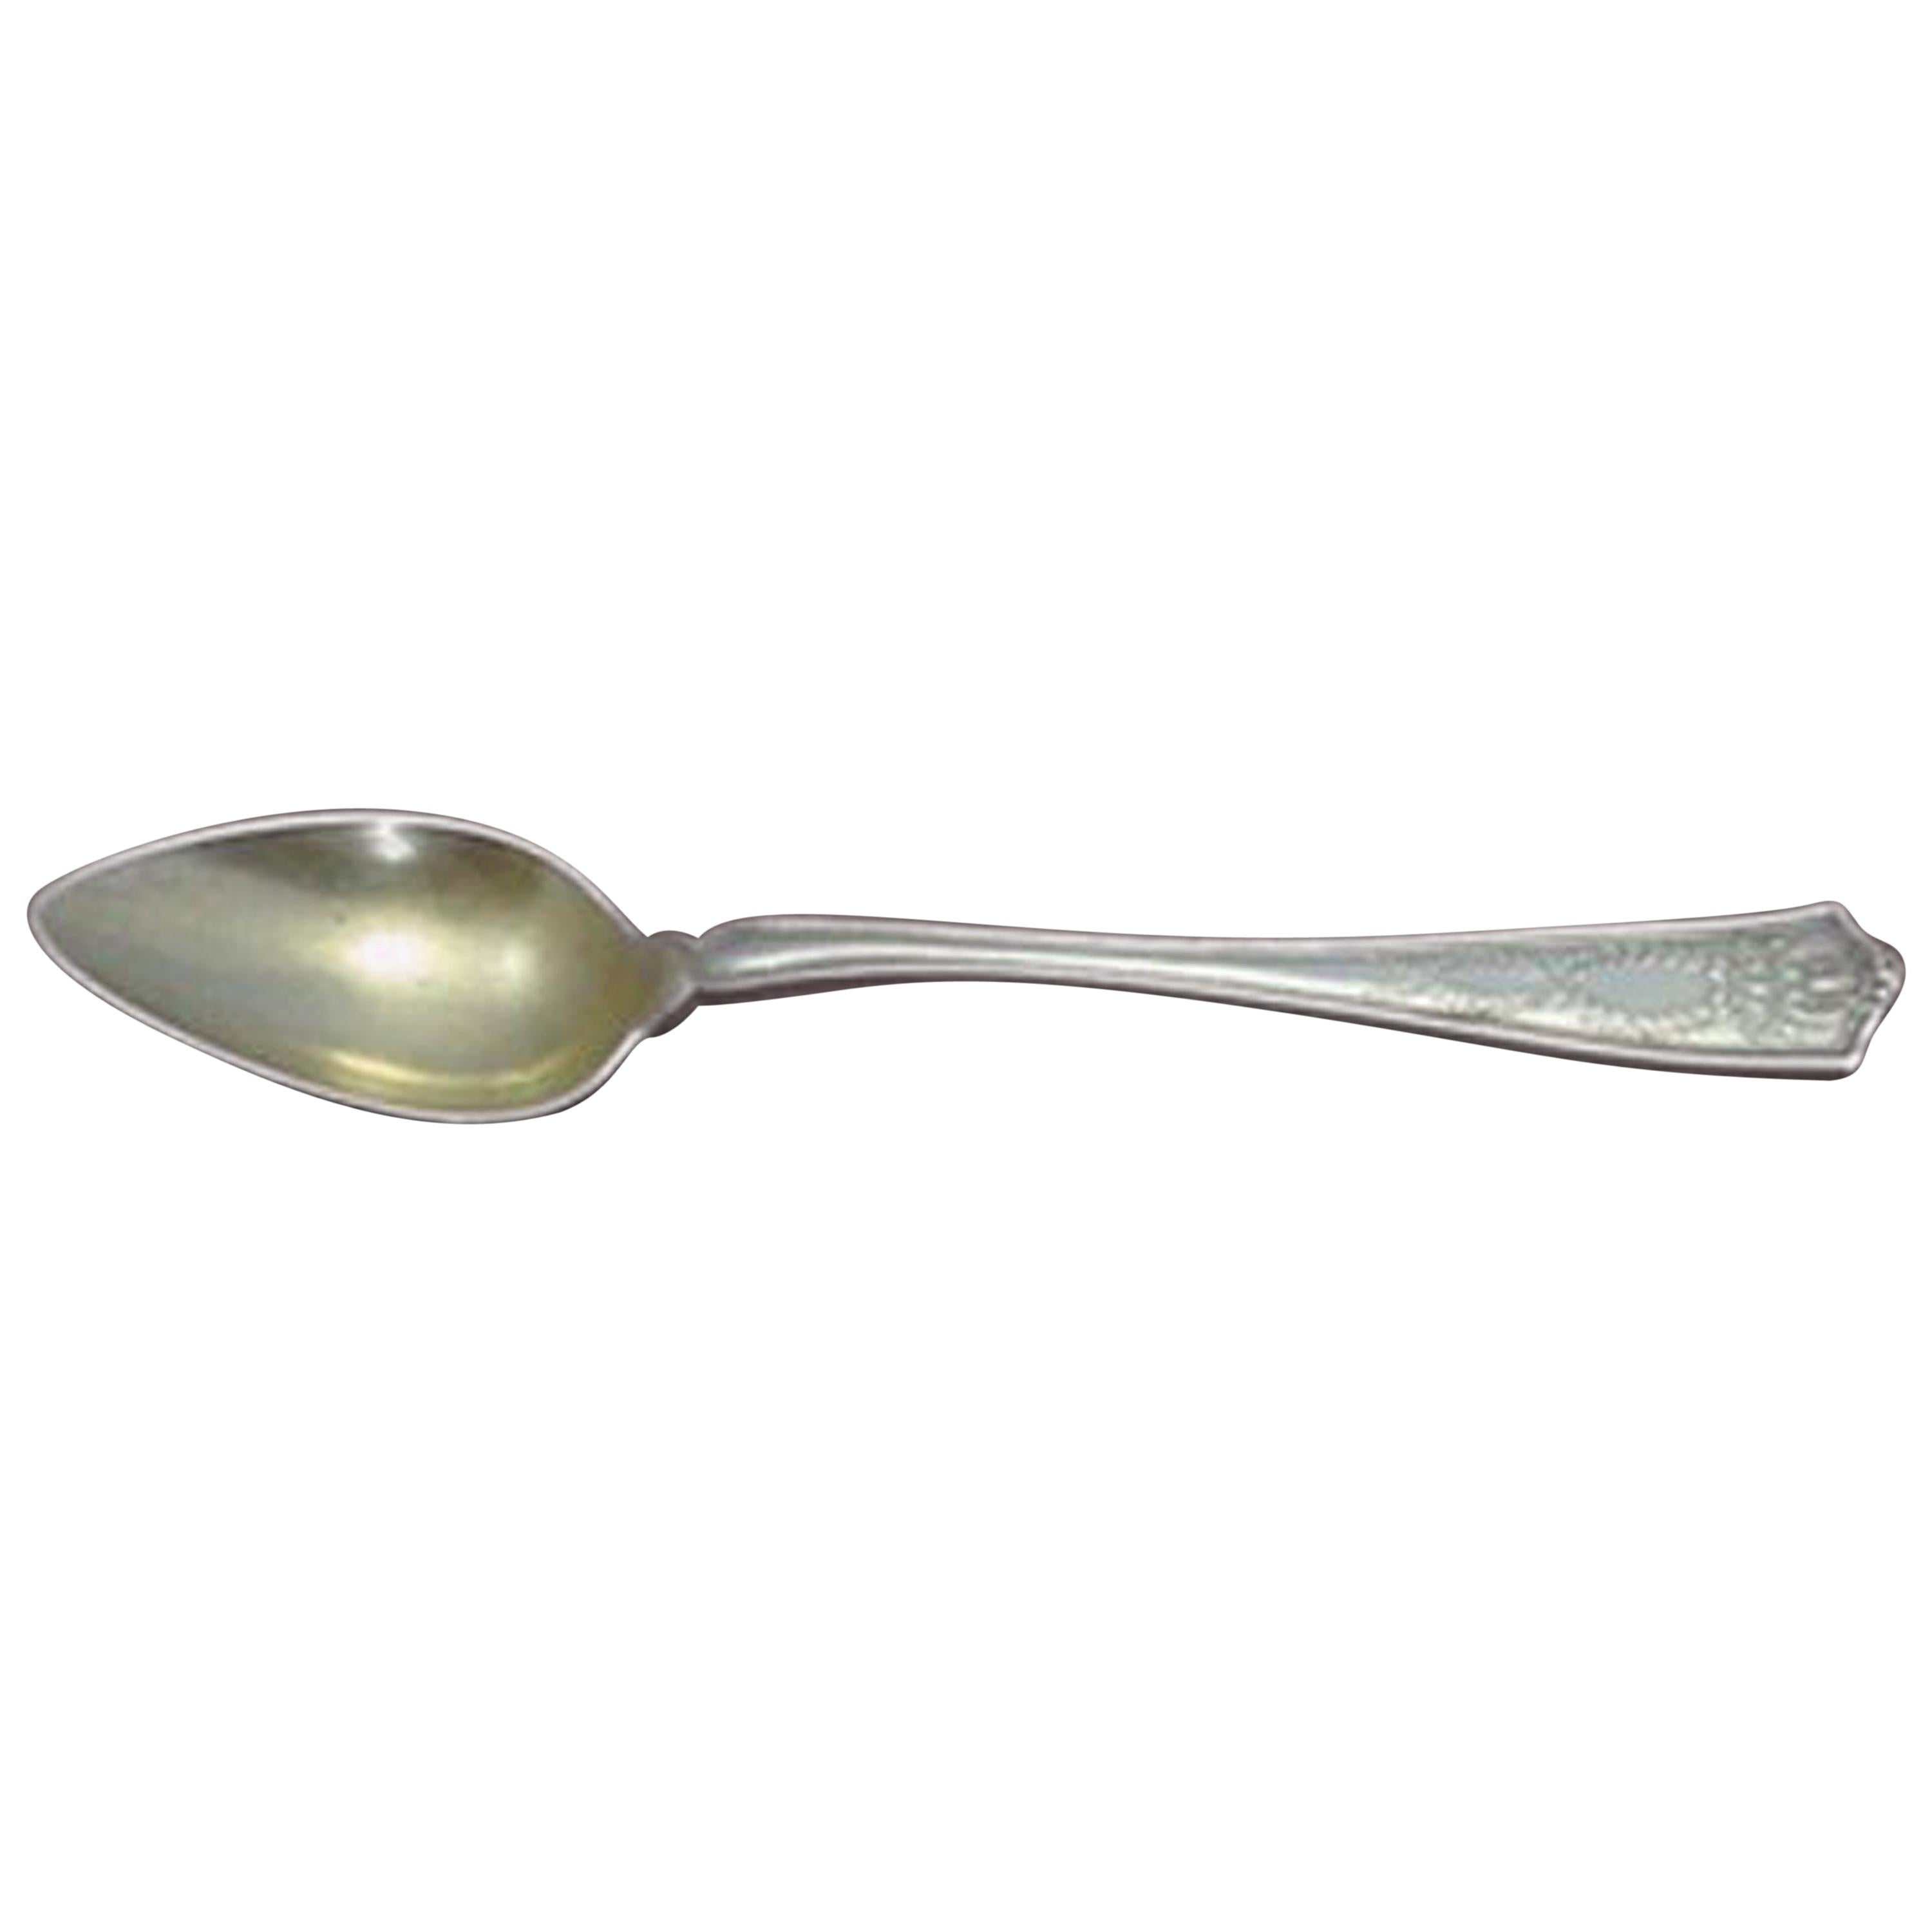 Winthrop by Tiffany & Co. Sterling Silver Grapefruit Spoon Gold Washed